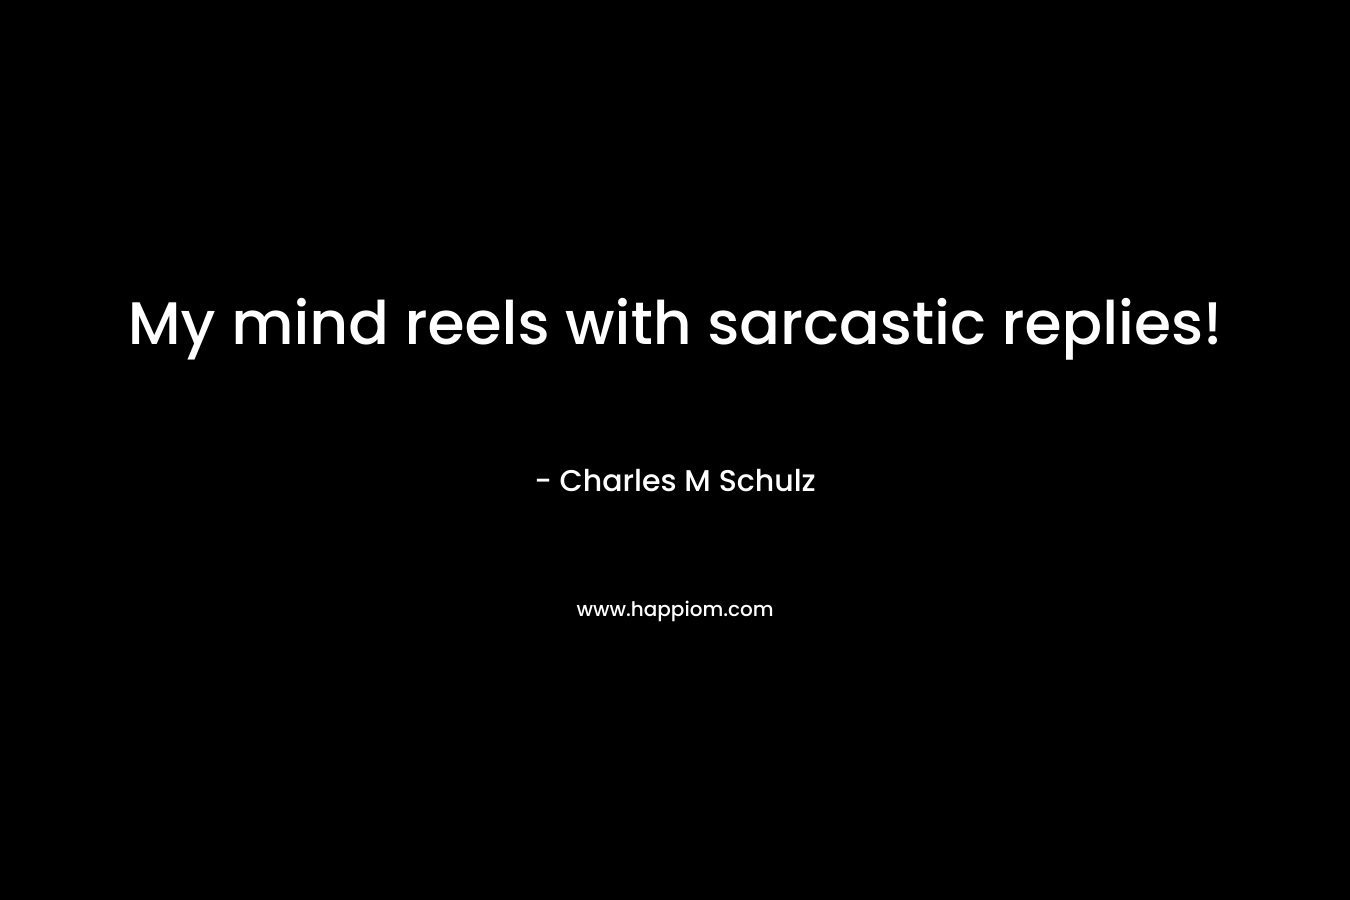 My mind reels with sarcastic replies! – Charles M Schulz